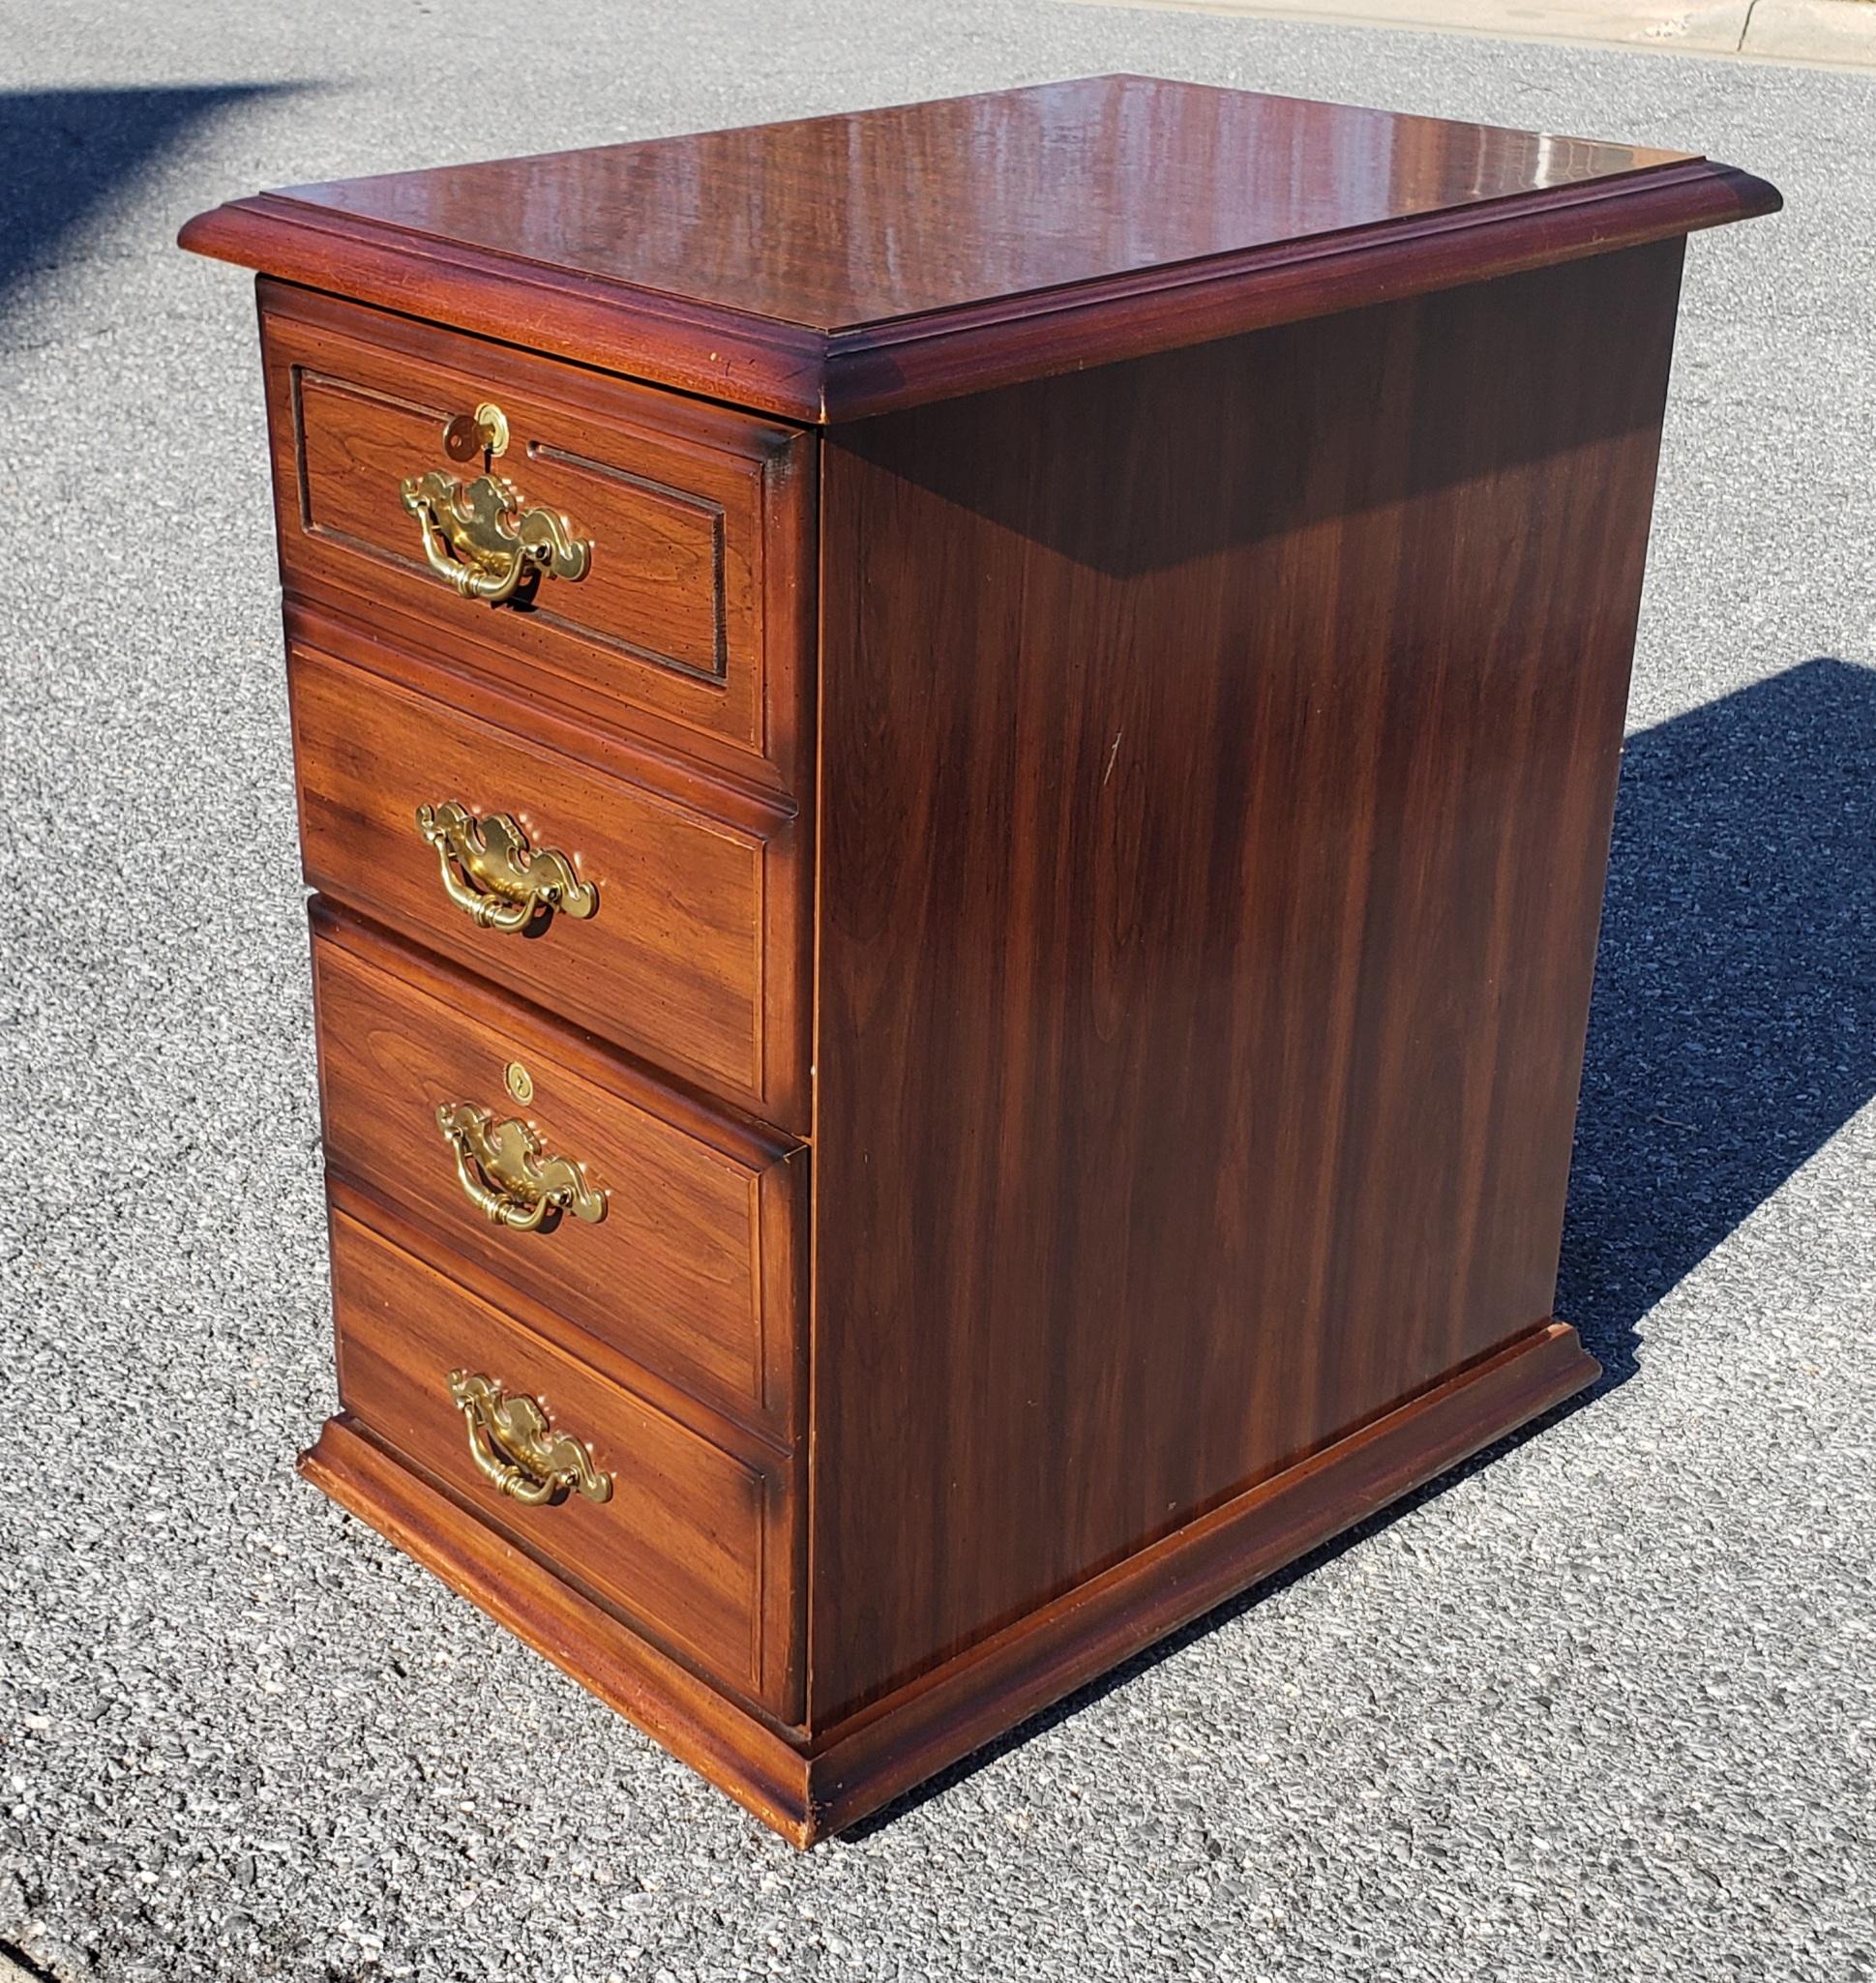 Executive style filing cabinet. Two drawers. Top and bottom drawers lock with key. Comes with one key. Very good vintage condition.